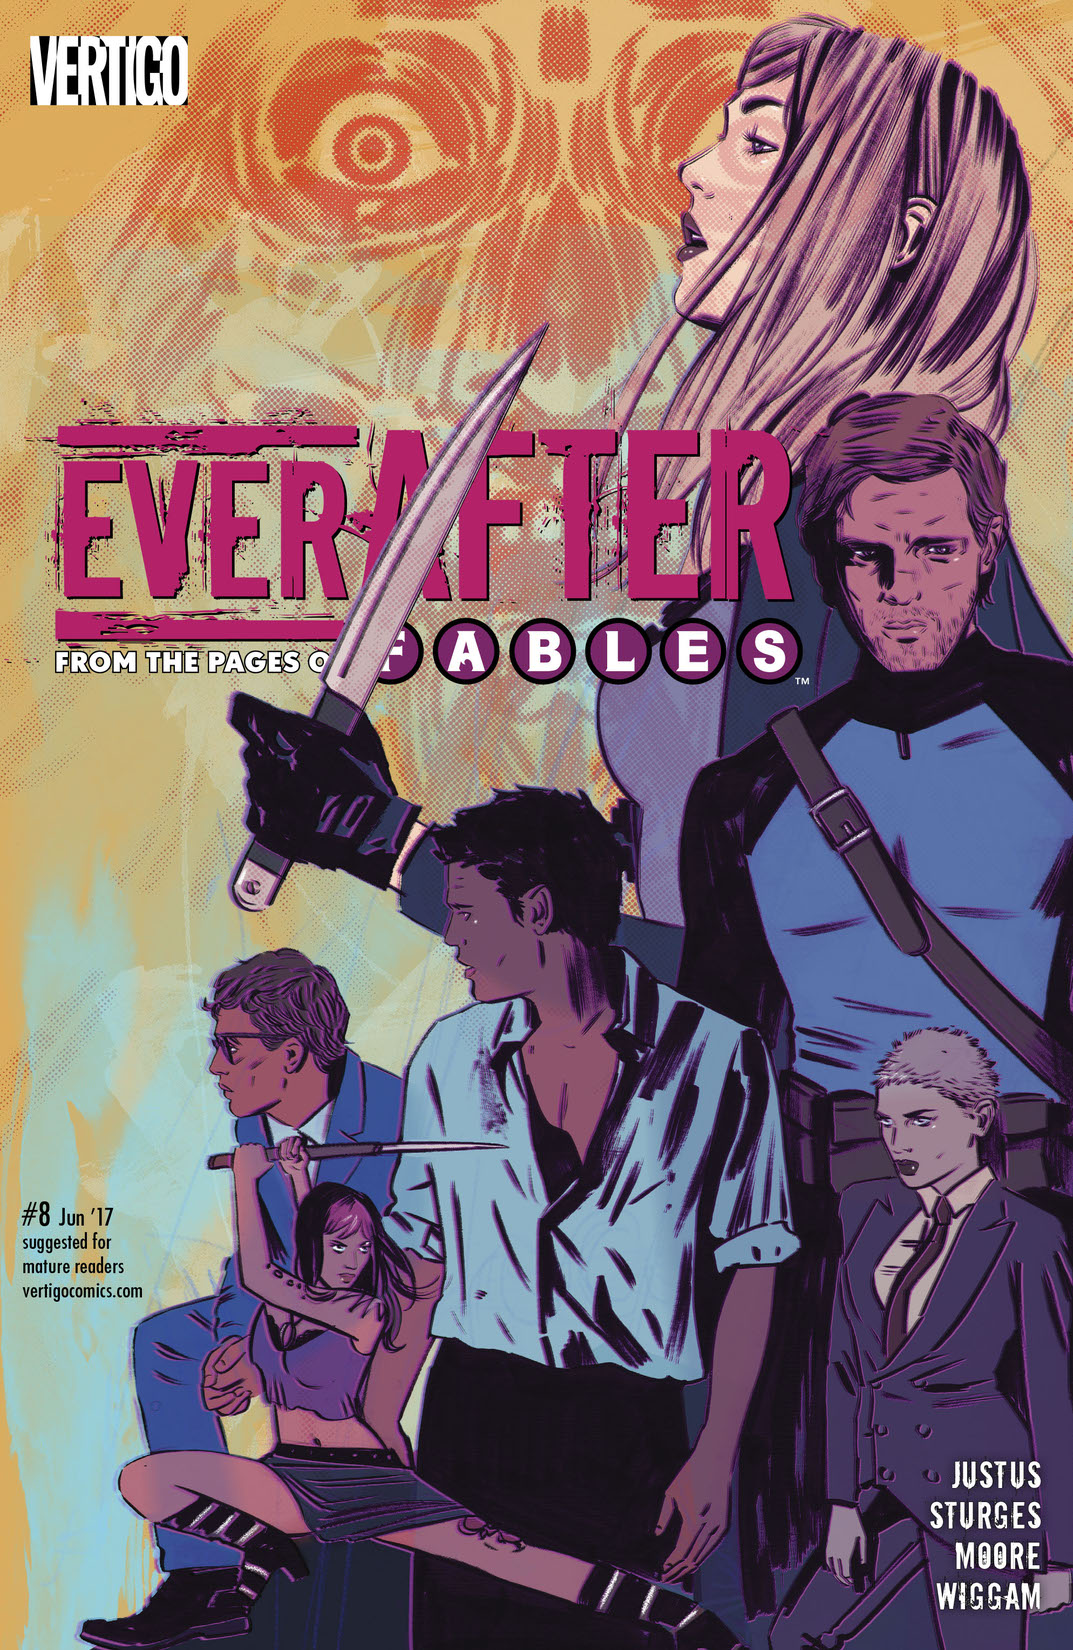 Everafter: From the Pages of Fables #8 preview images